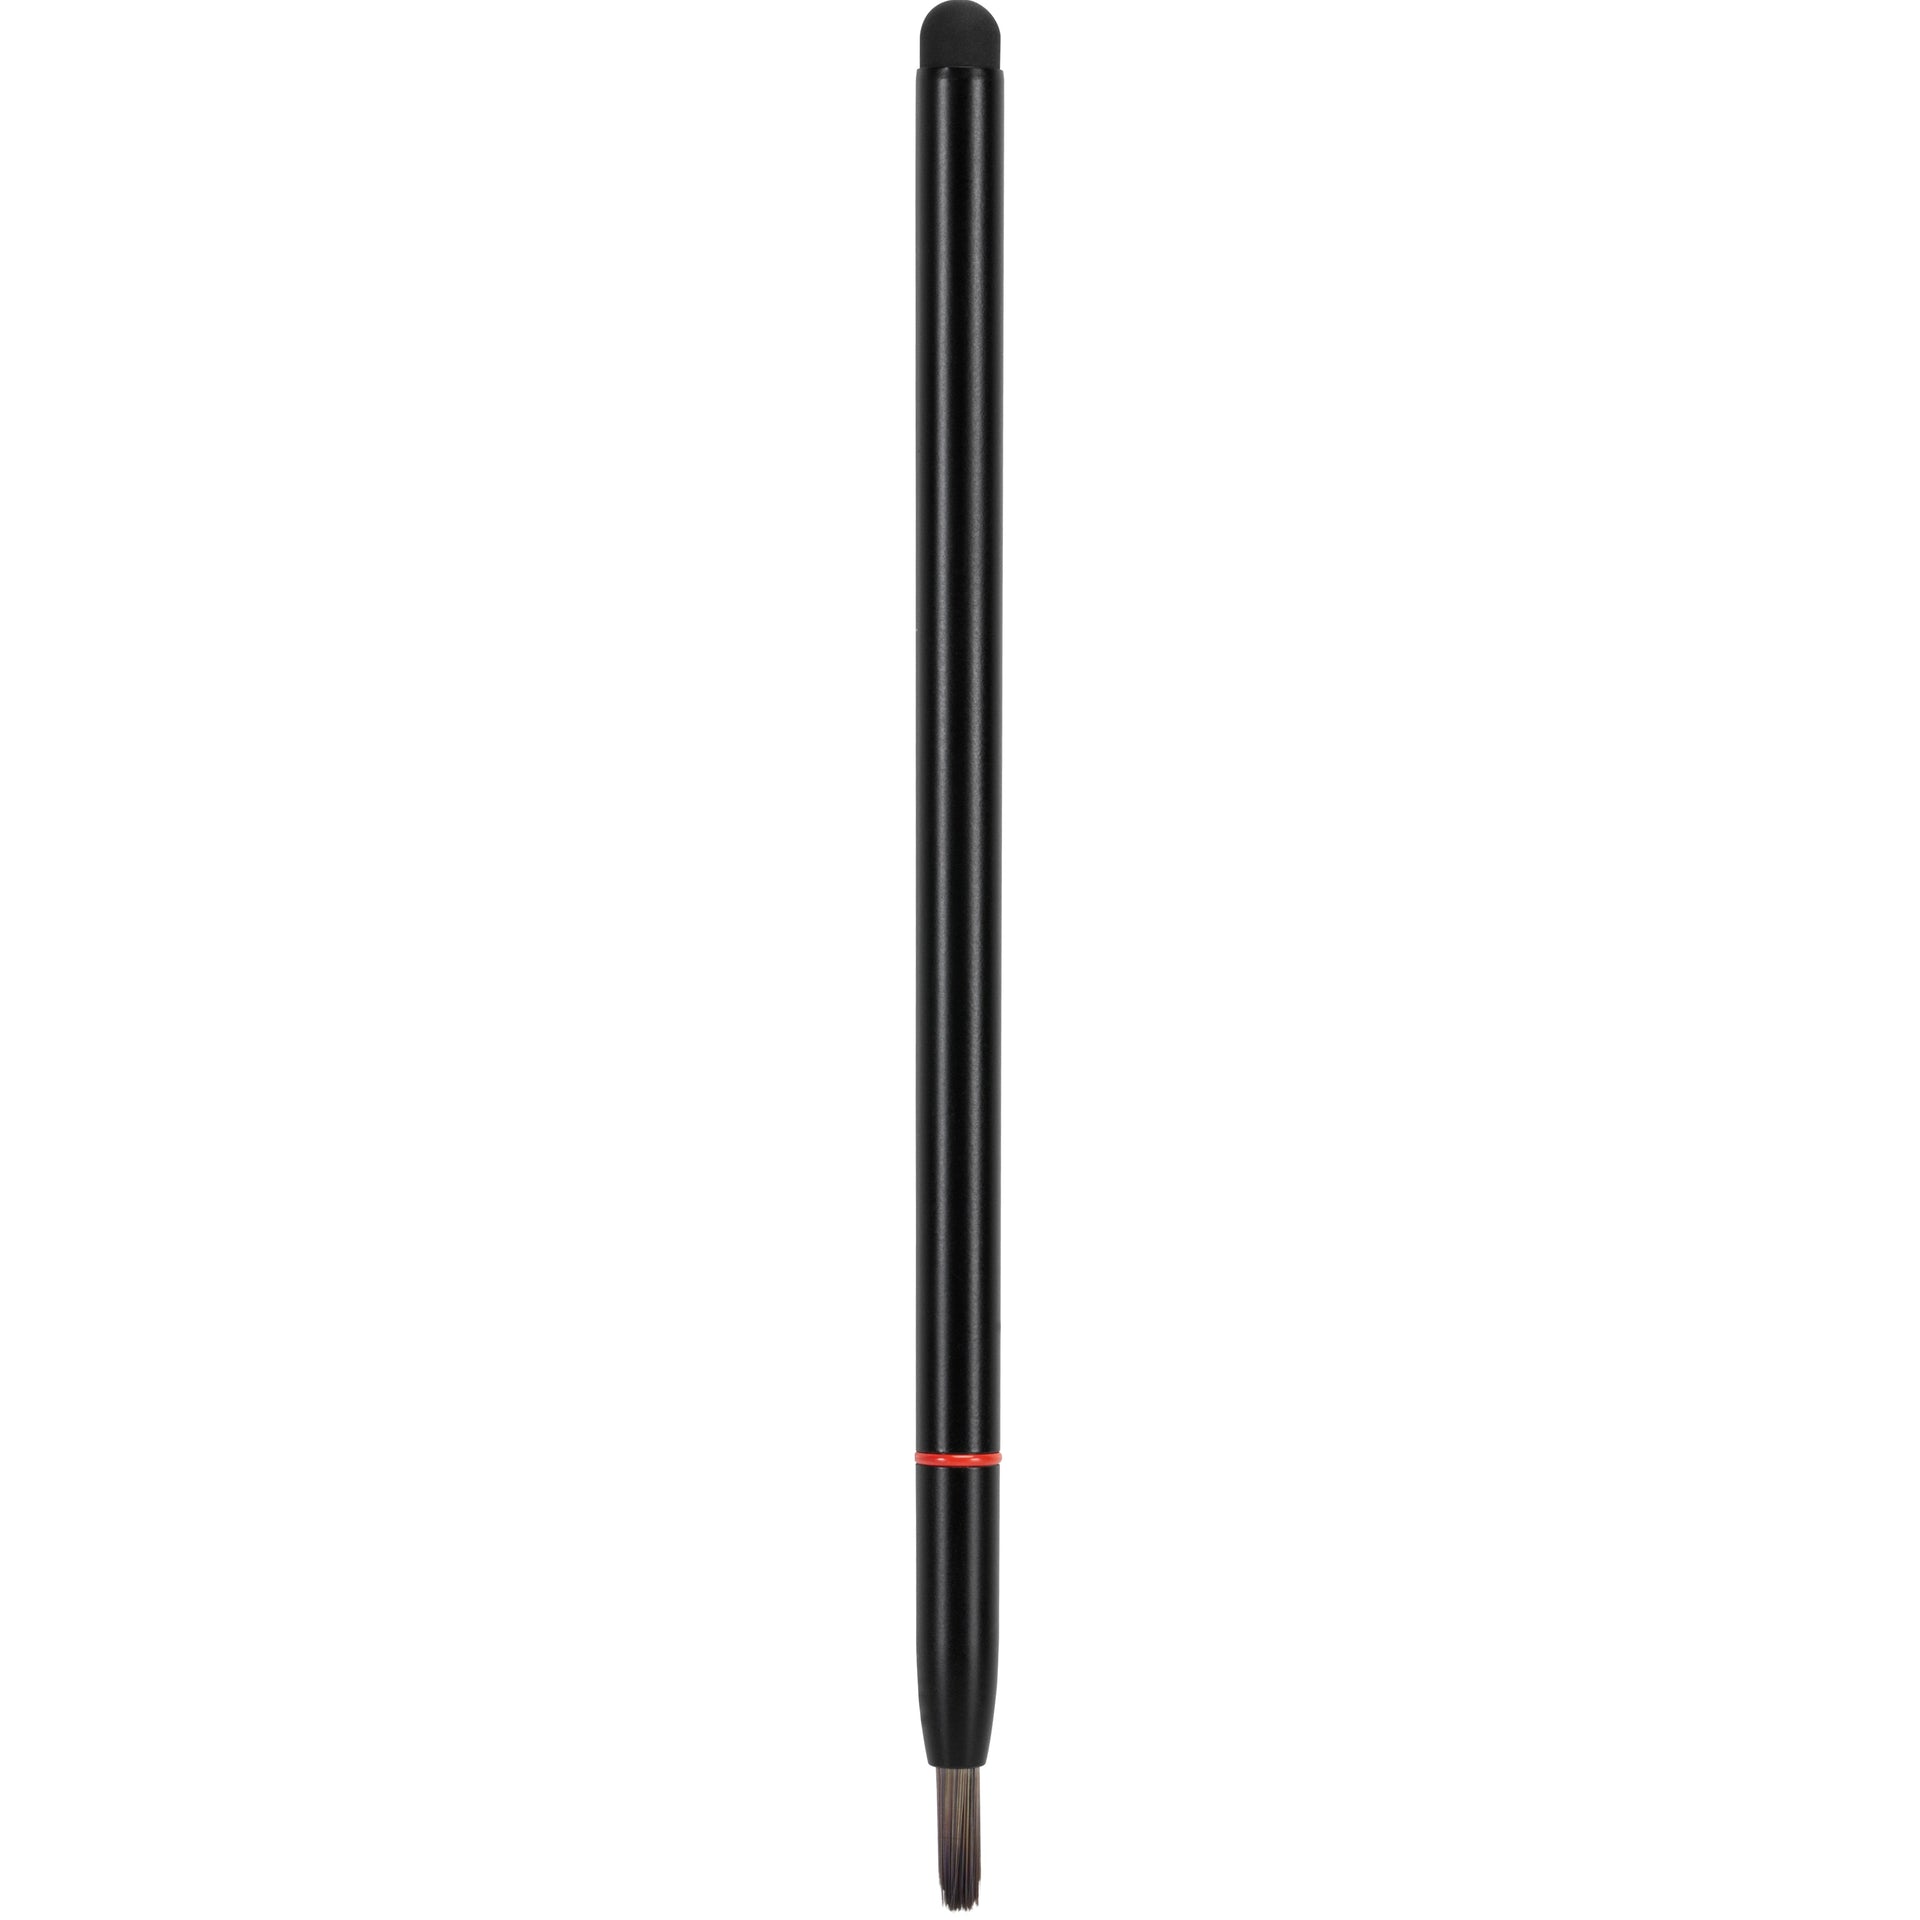 Targus AMM01TBUS Stylus for Tablets and Smartphones